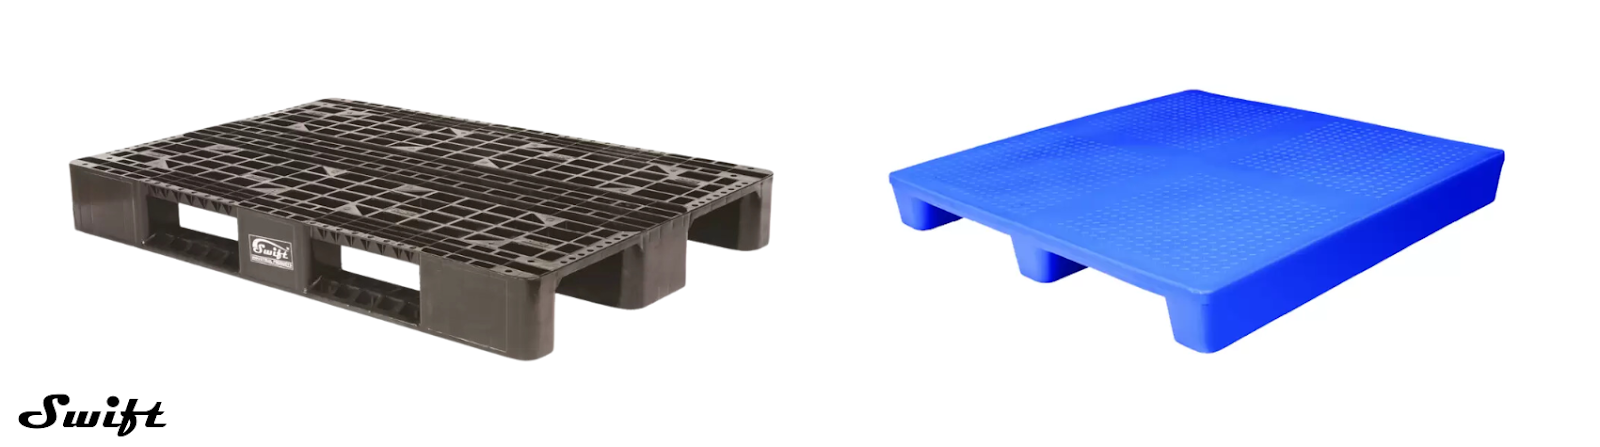 Swift provided top quality of plastic pallets globally with variety of models.